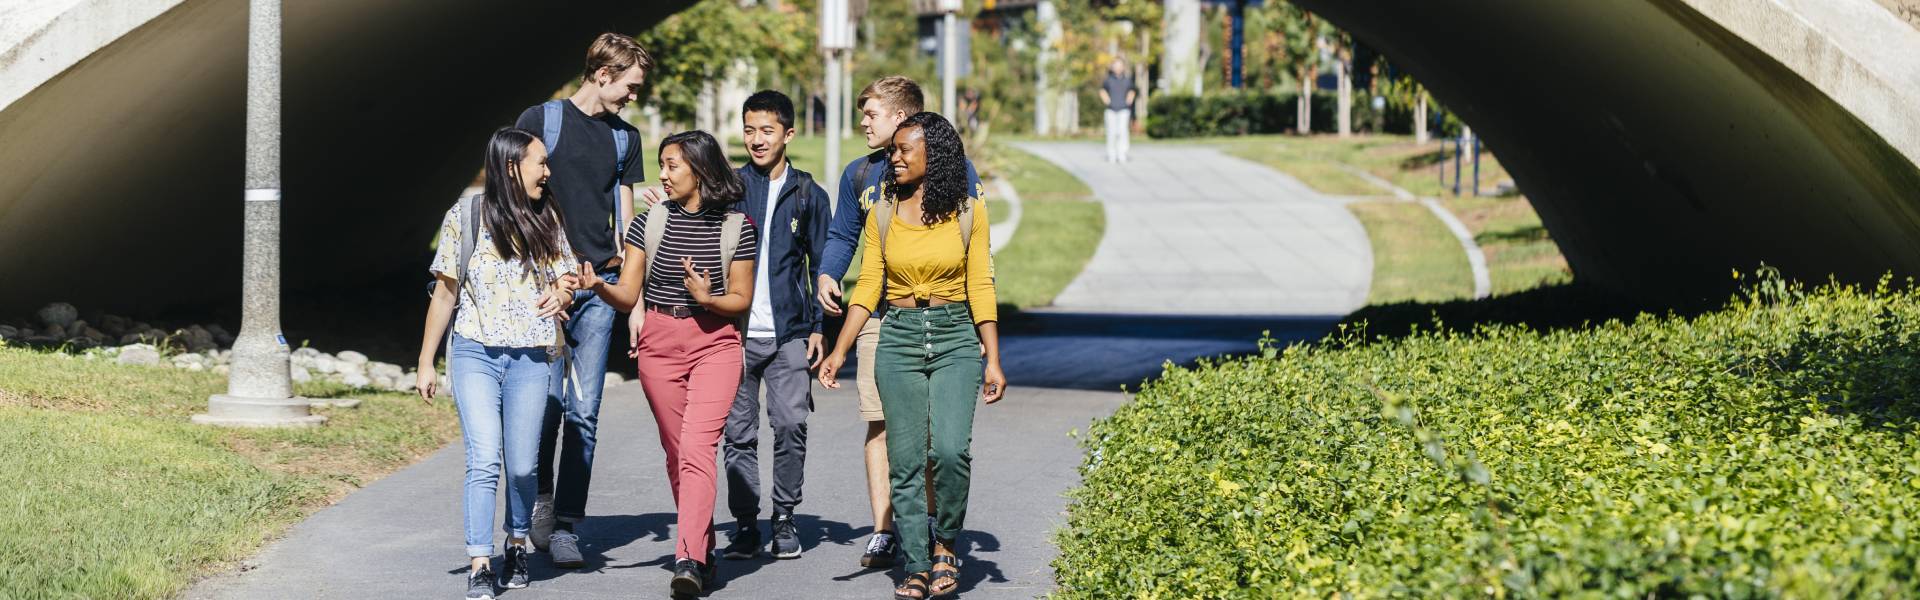 Group of students walking outside